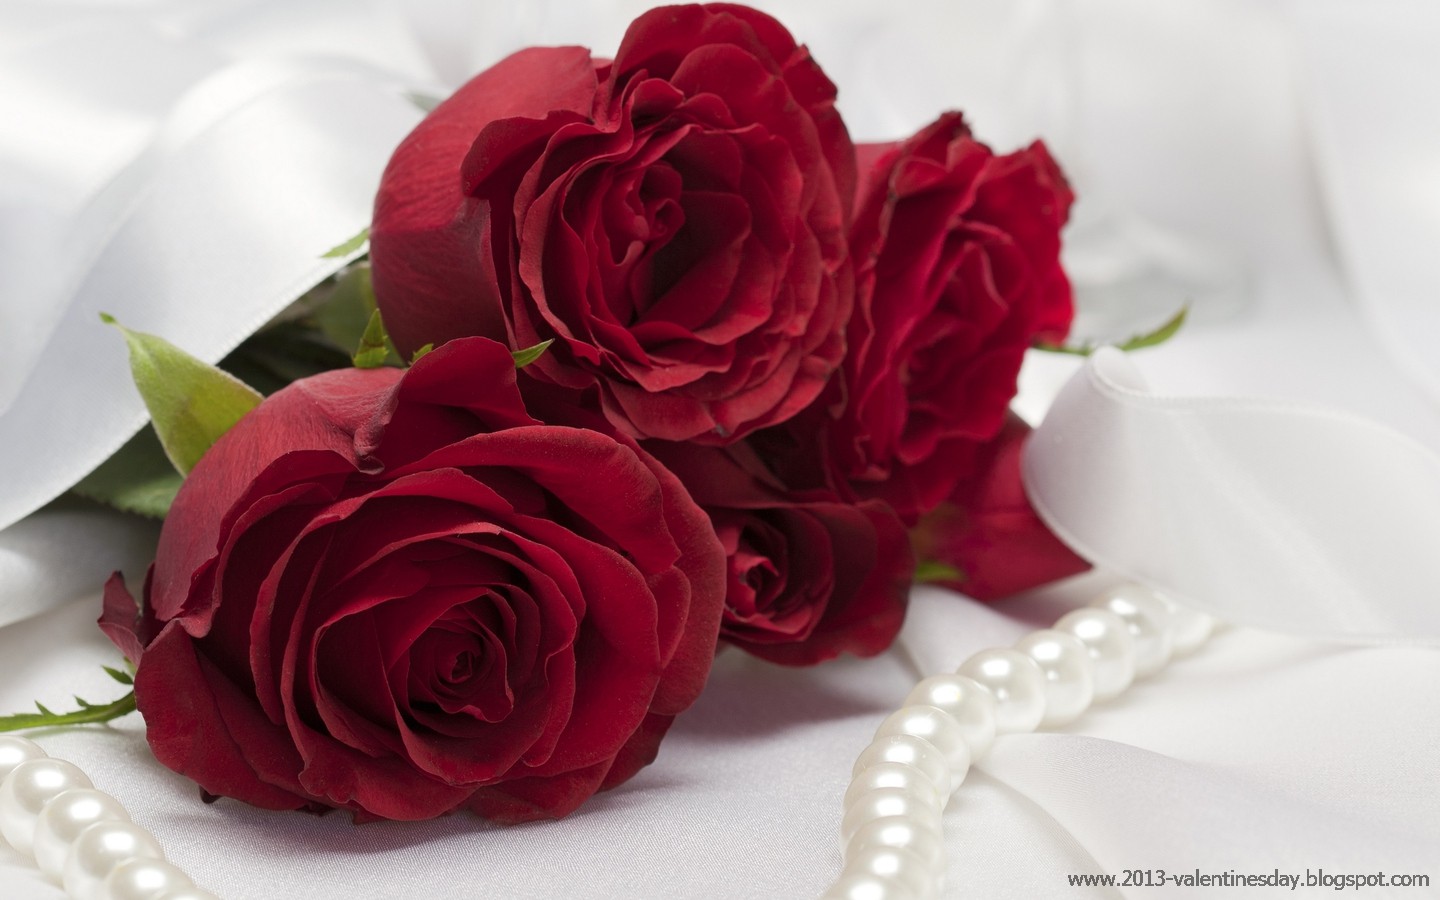 13. New Latest Happy Rose Day 2014 Hd Wallpapers